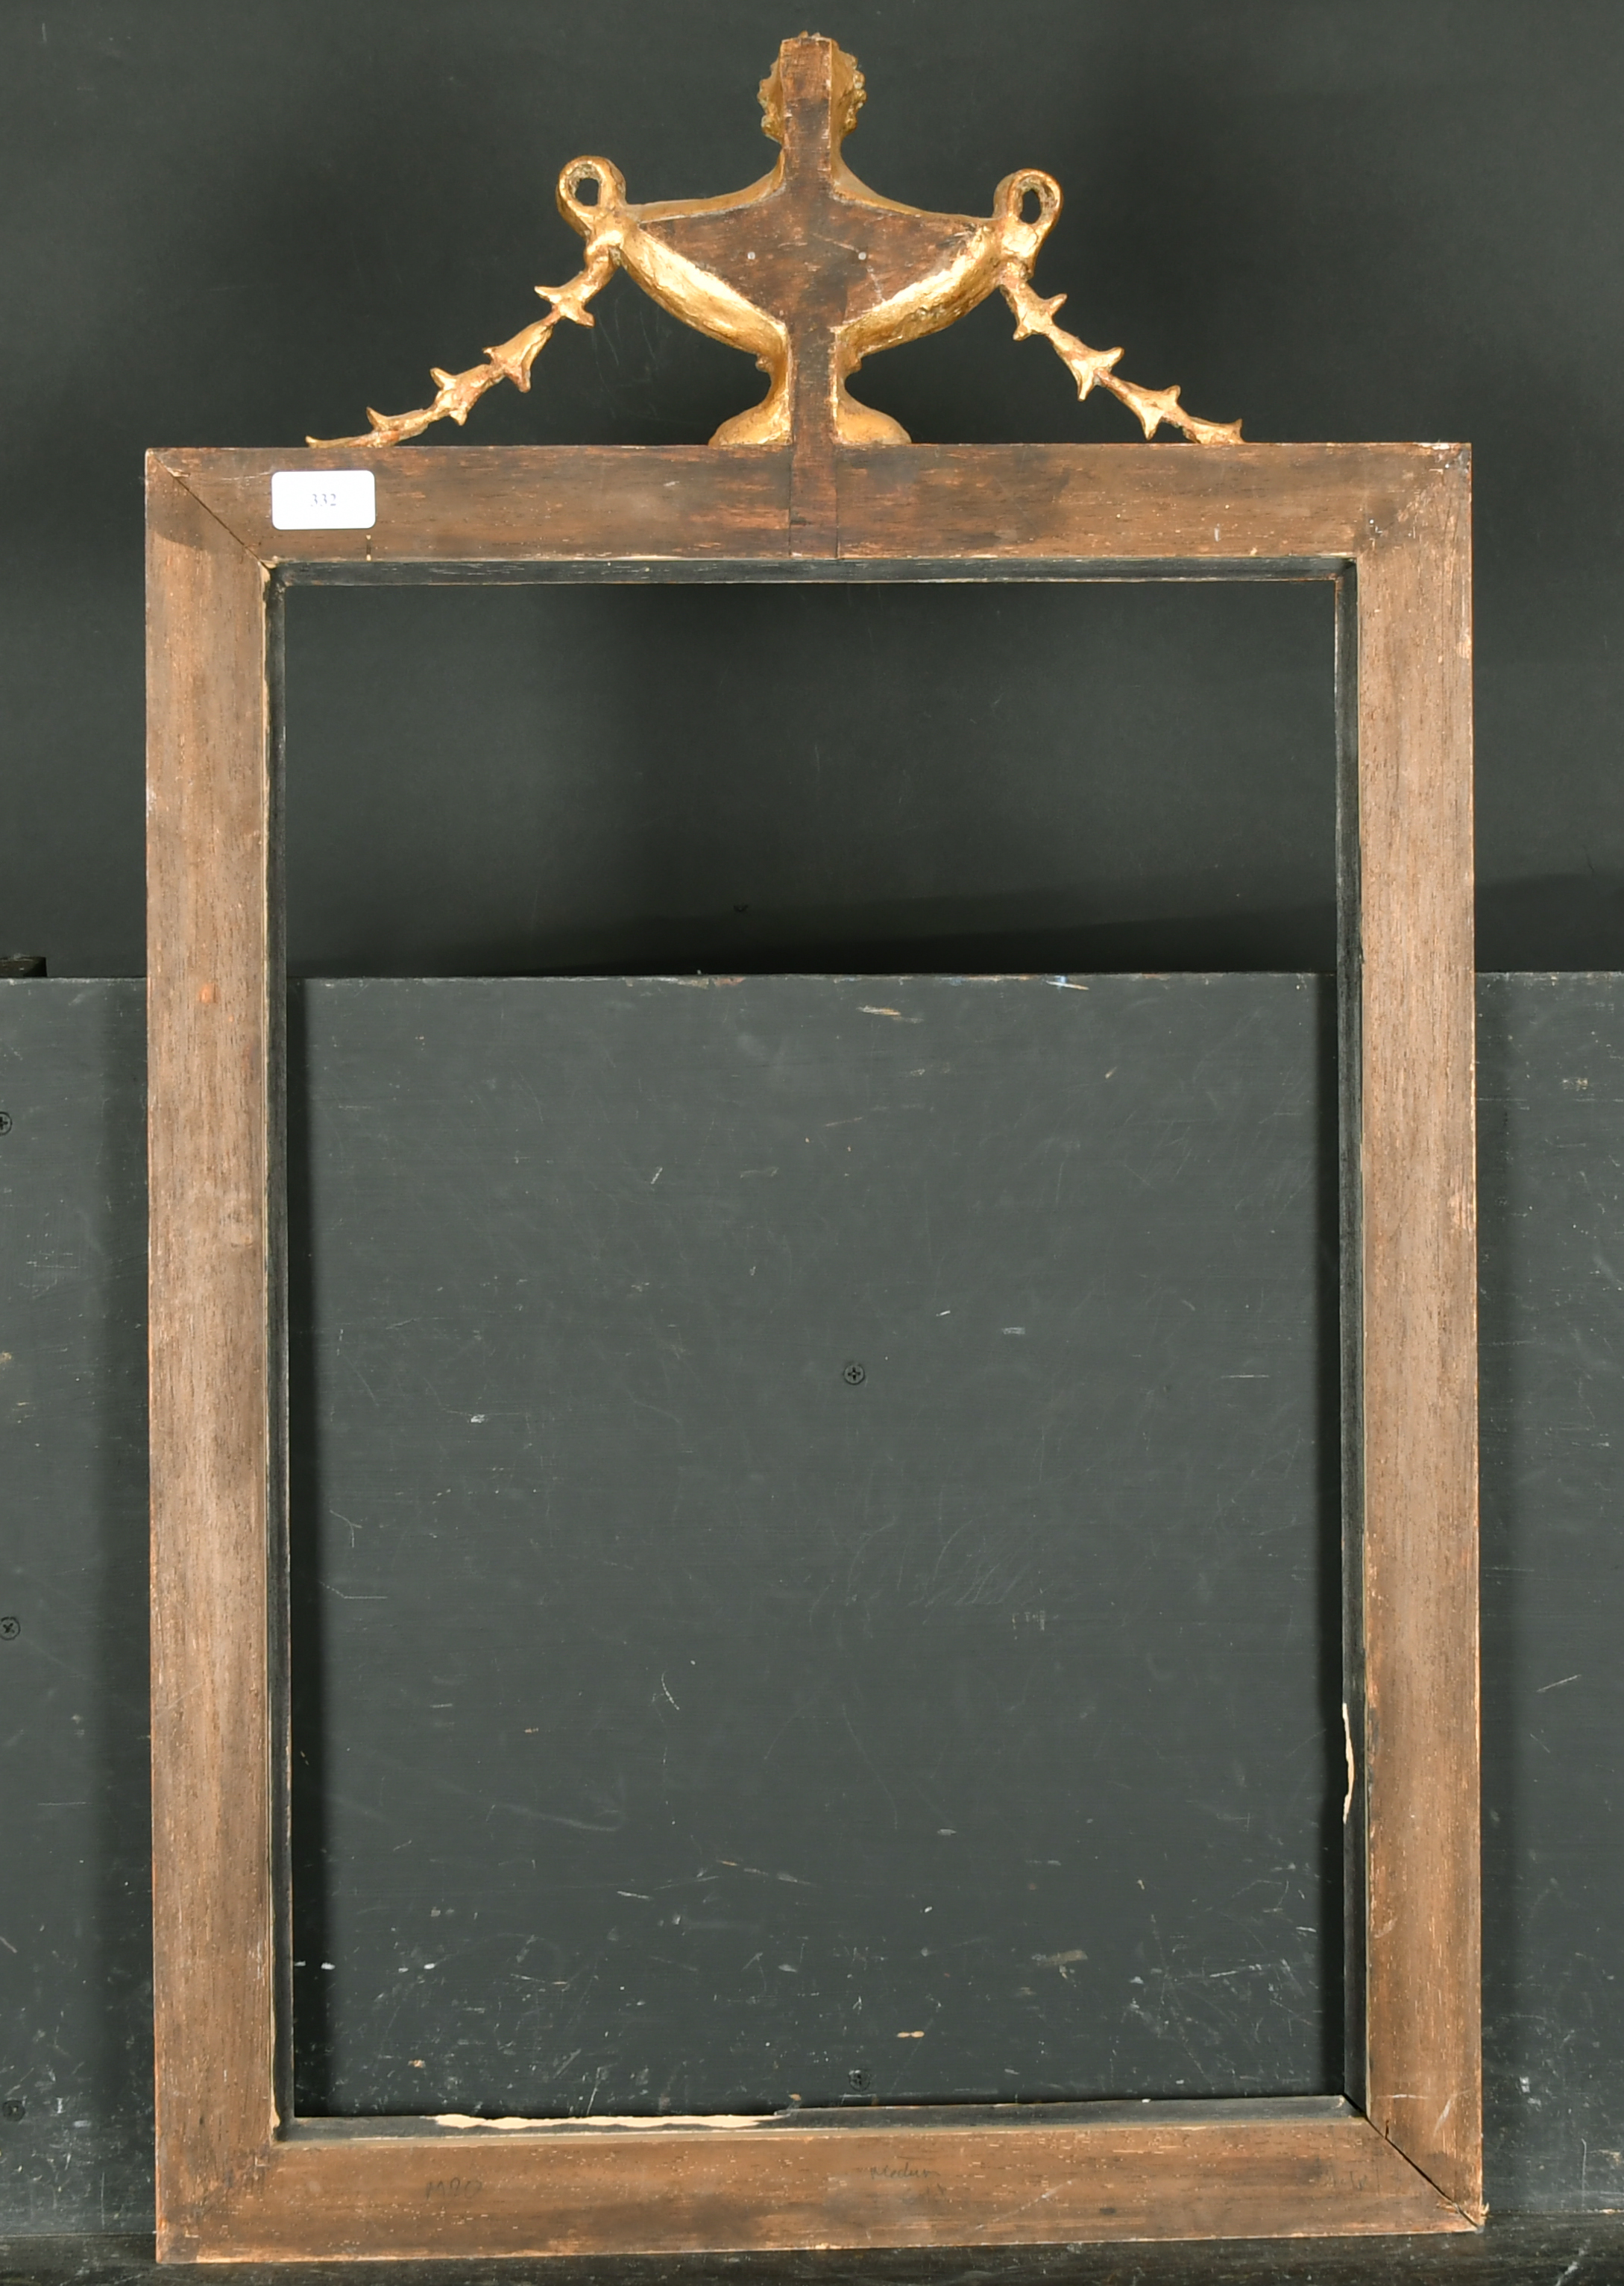 20th Century English School. A Gilt Composition frame, with an ornate top with an urn, rebate 23.25" - Image 3 of 3